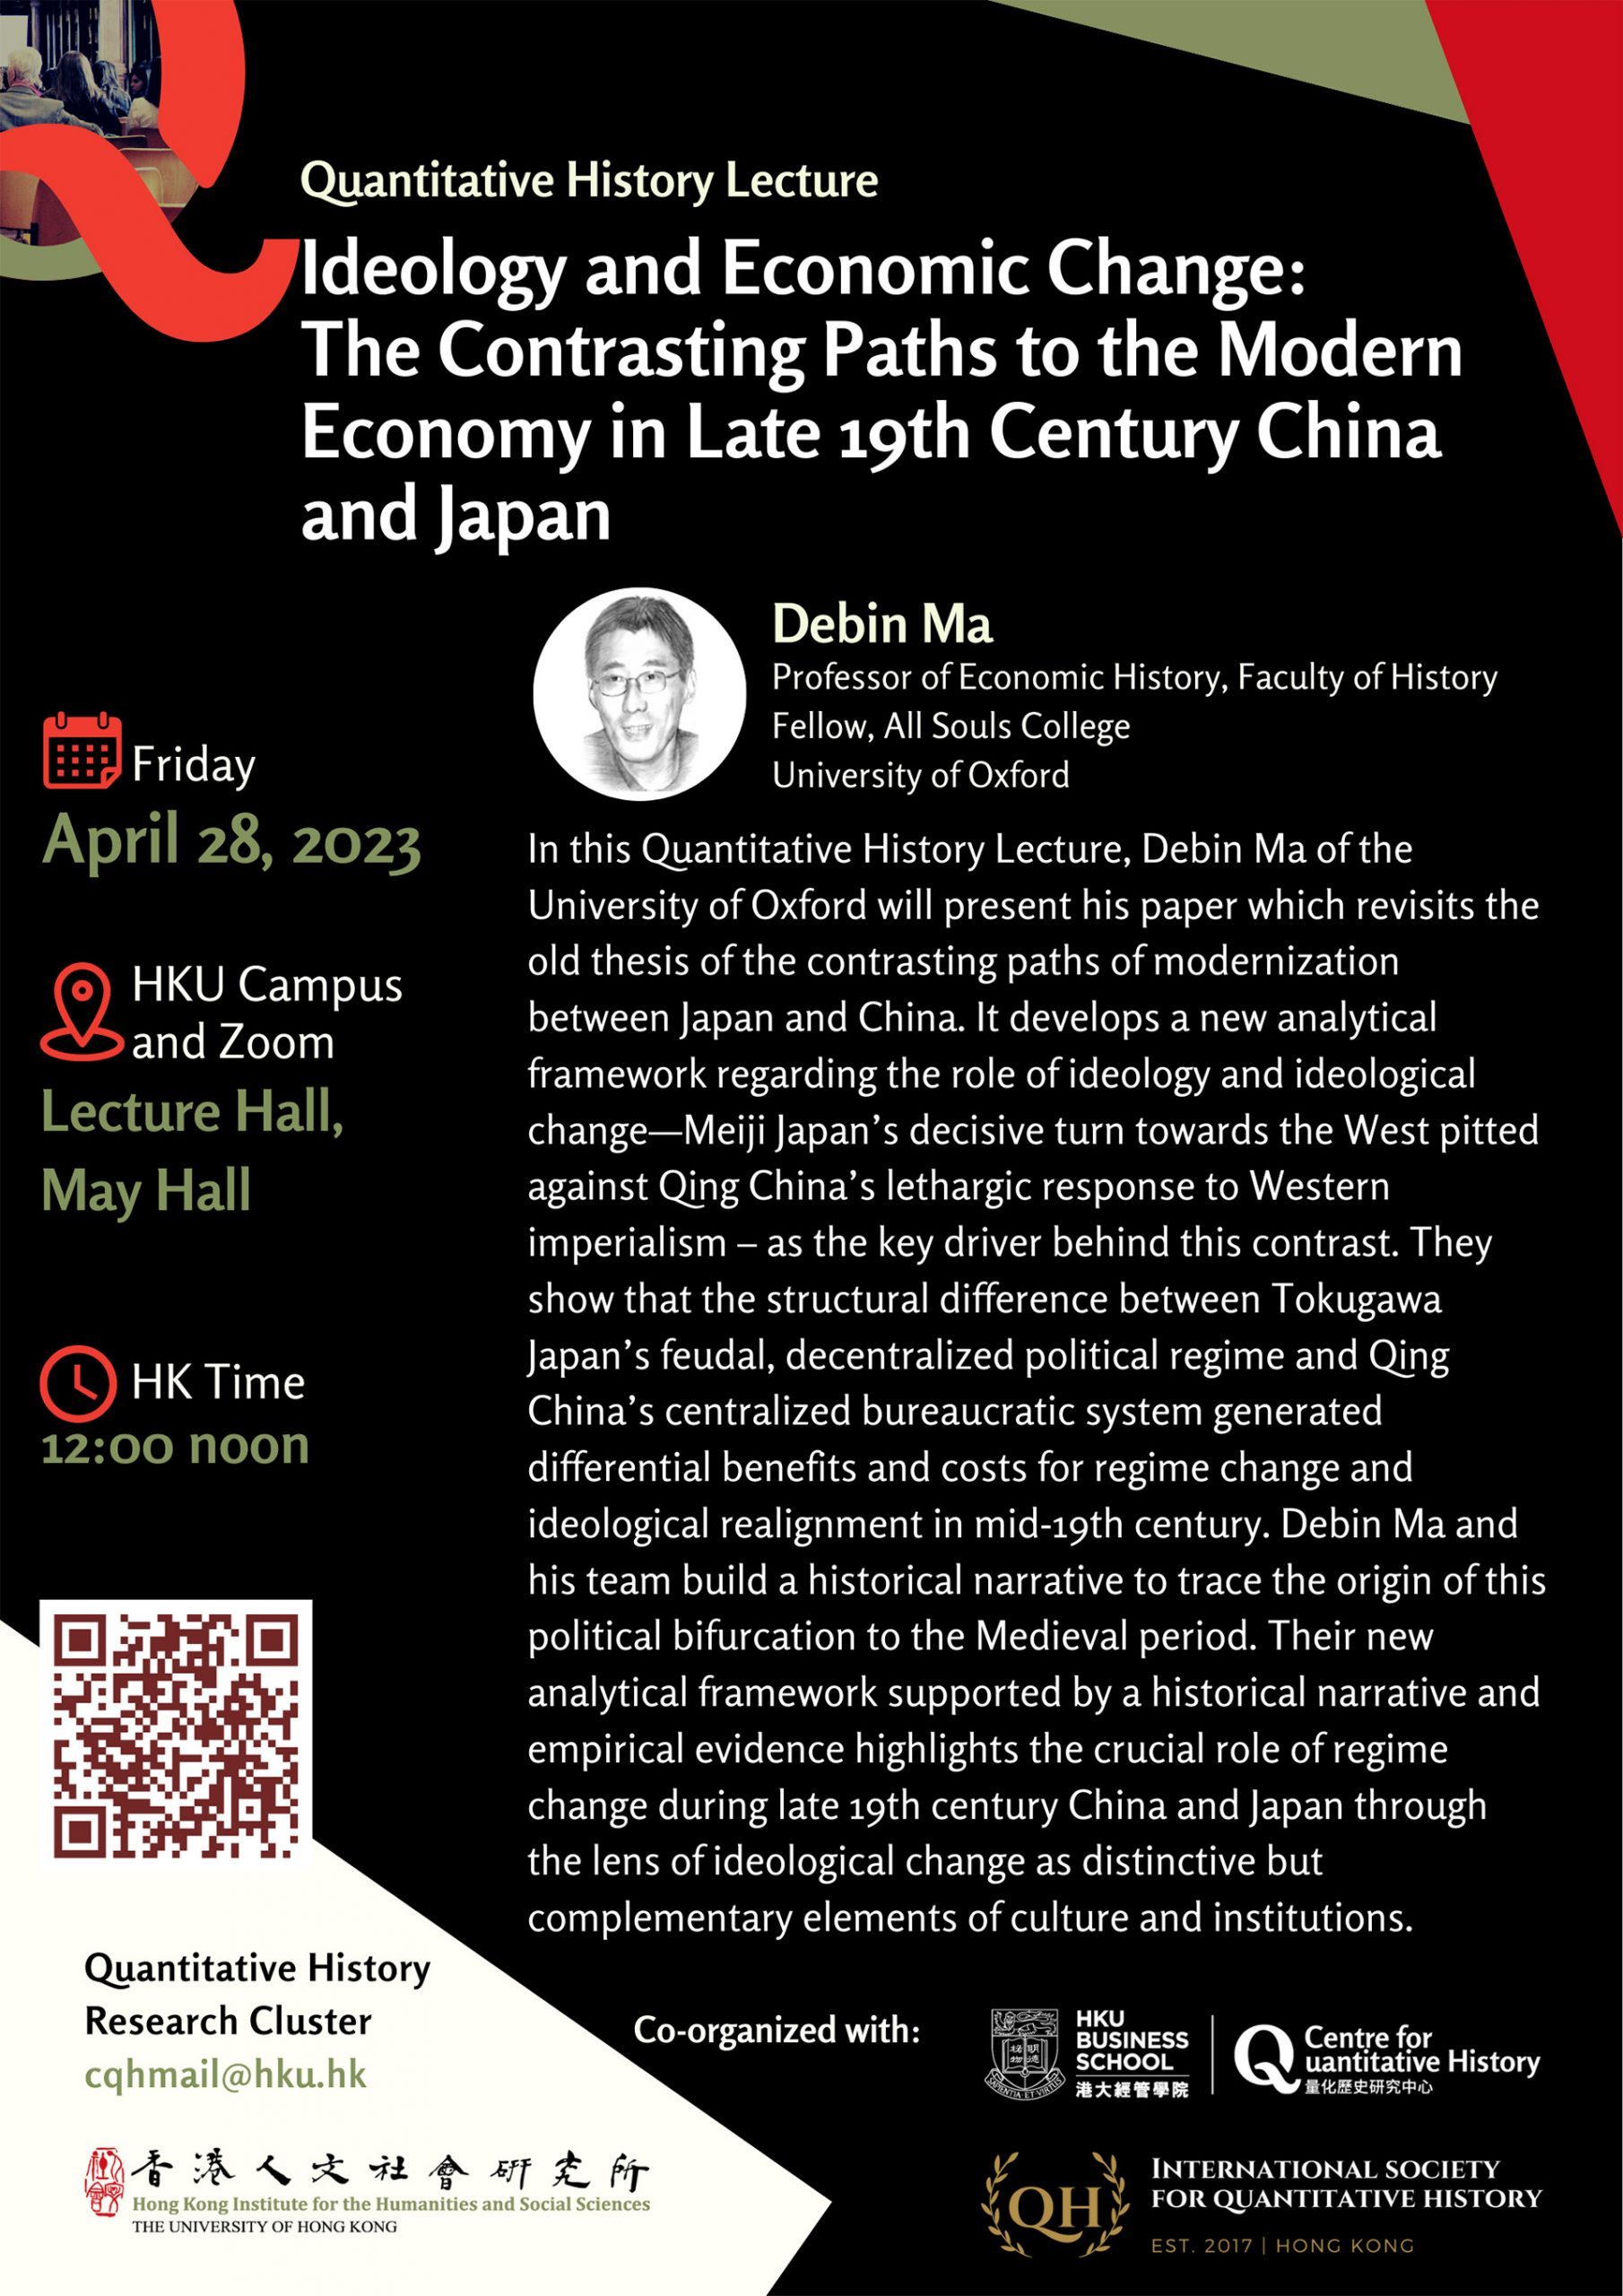 Quantitative History Lecture Series on “ Ideology and Economic Change: The Contrasting Paths to the Modern Economy in Late 19th Century China and Japan” by Professor Debin Ma (April 28, 2023)